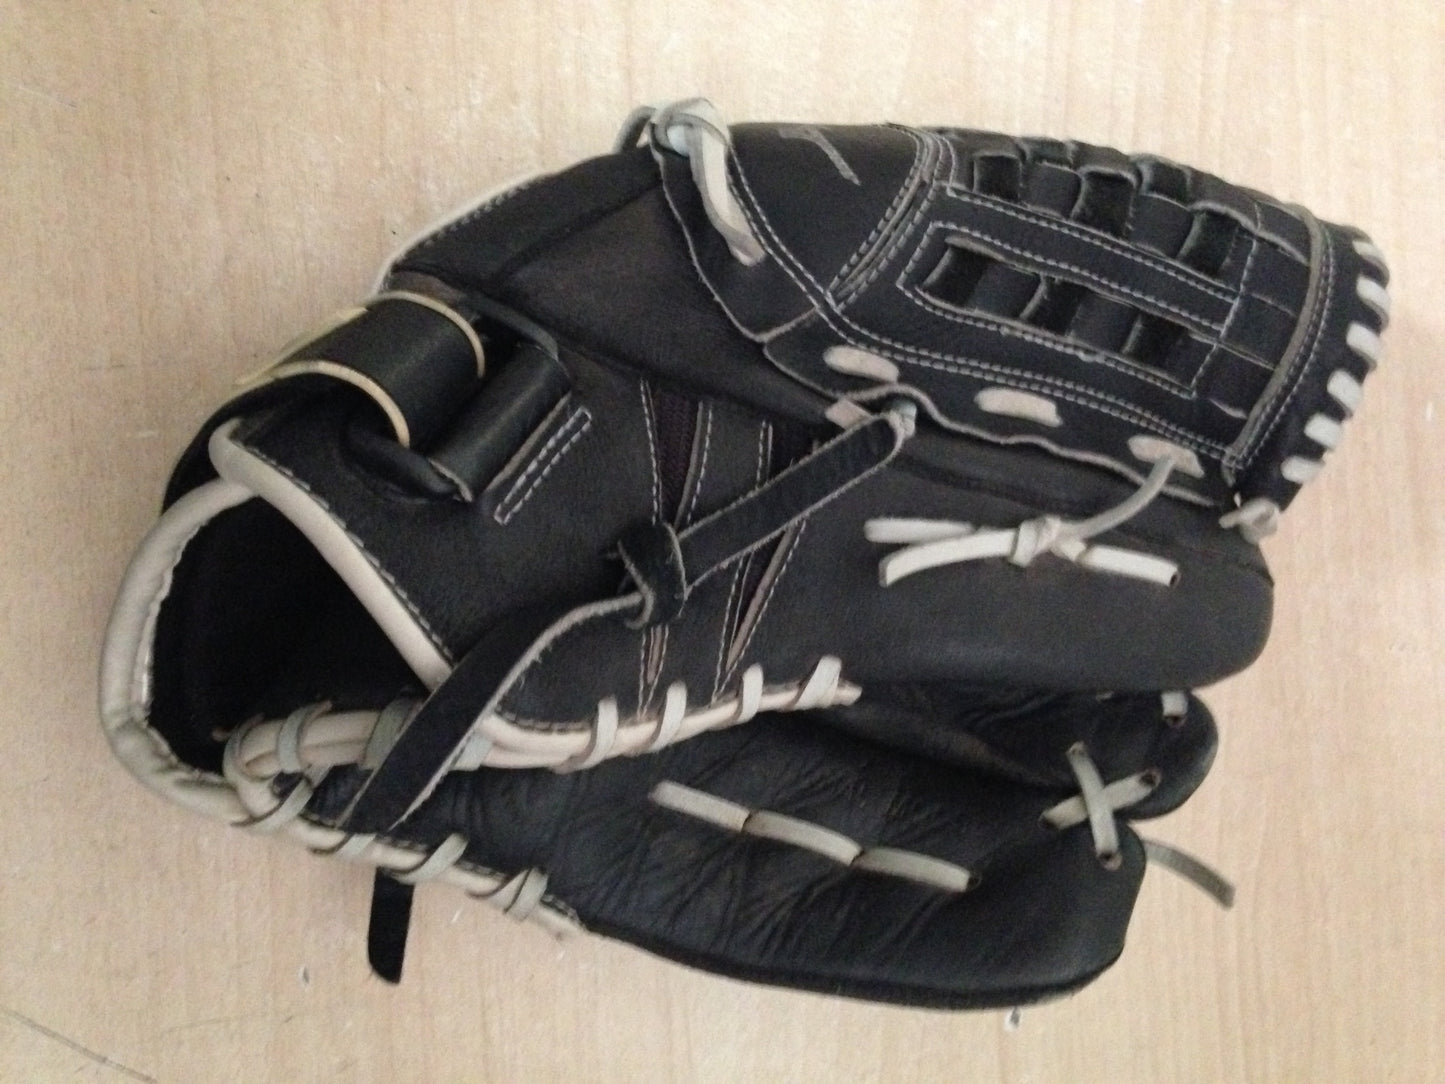 Baseball Glove Adult Size 13 inch Nike Professional  Black Soft Leather Excellent Fits on Left Hand